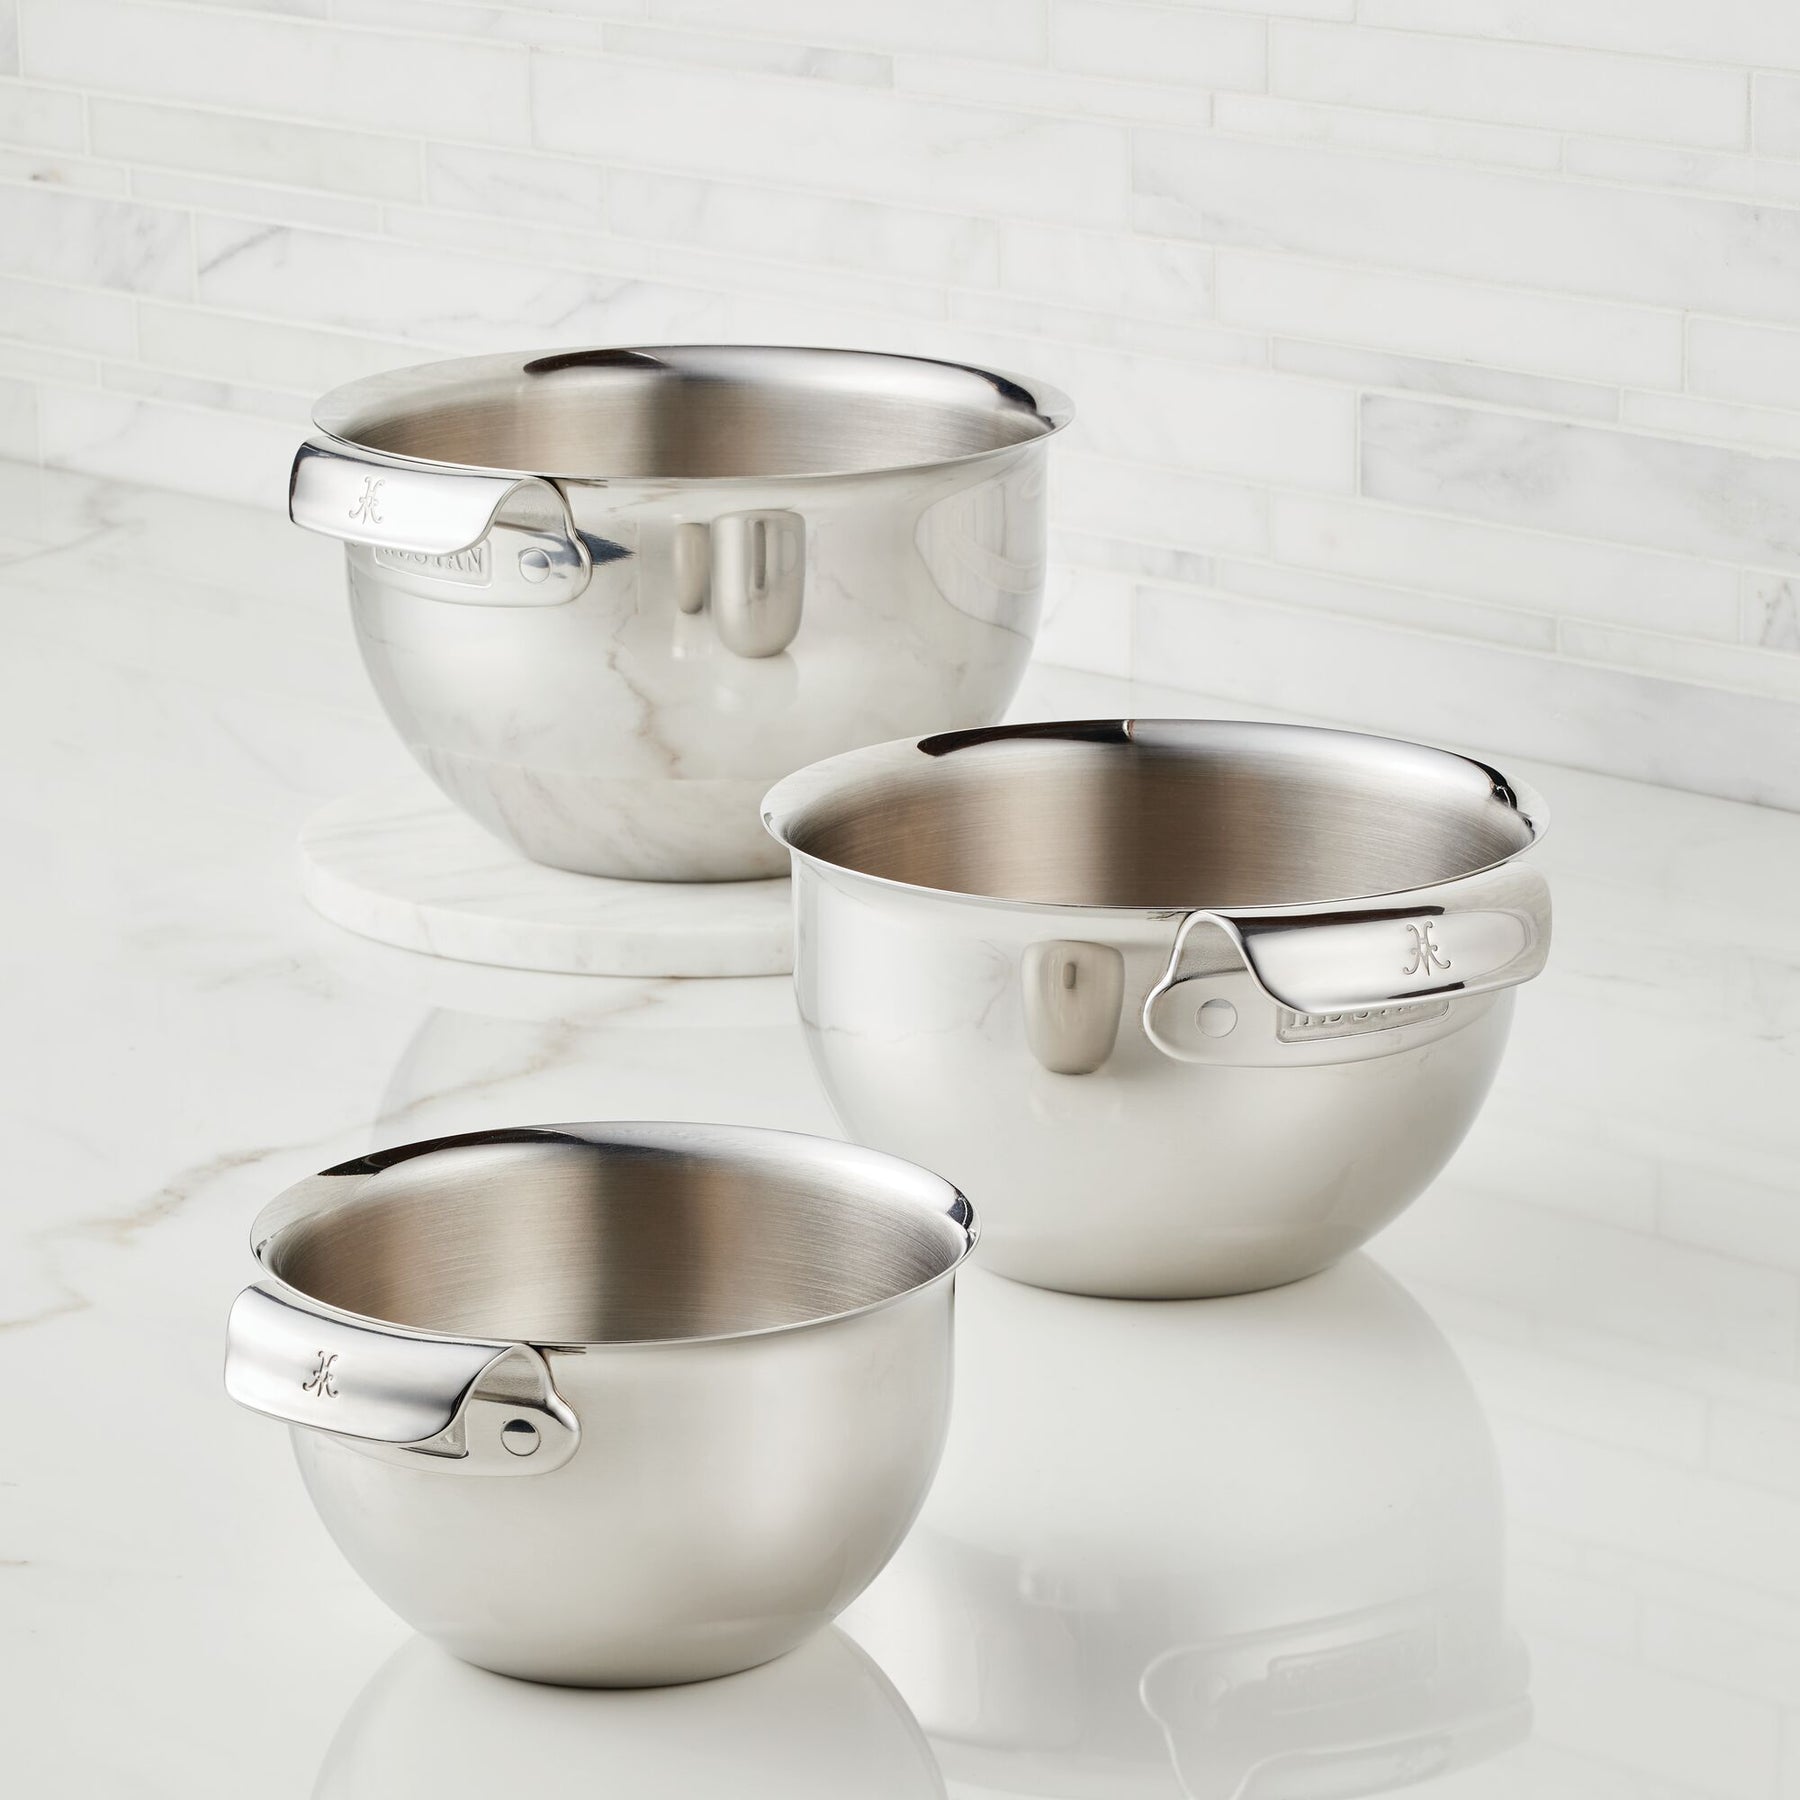 Cook Pro Stainless Steel 3 Piece Mixing Bowl Set